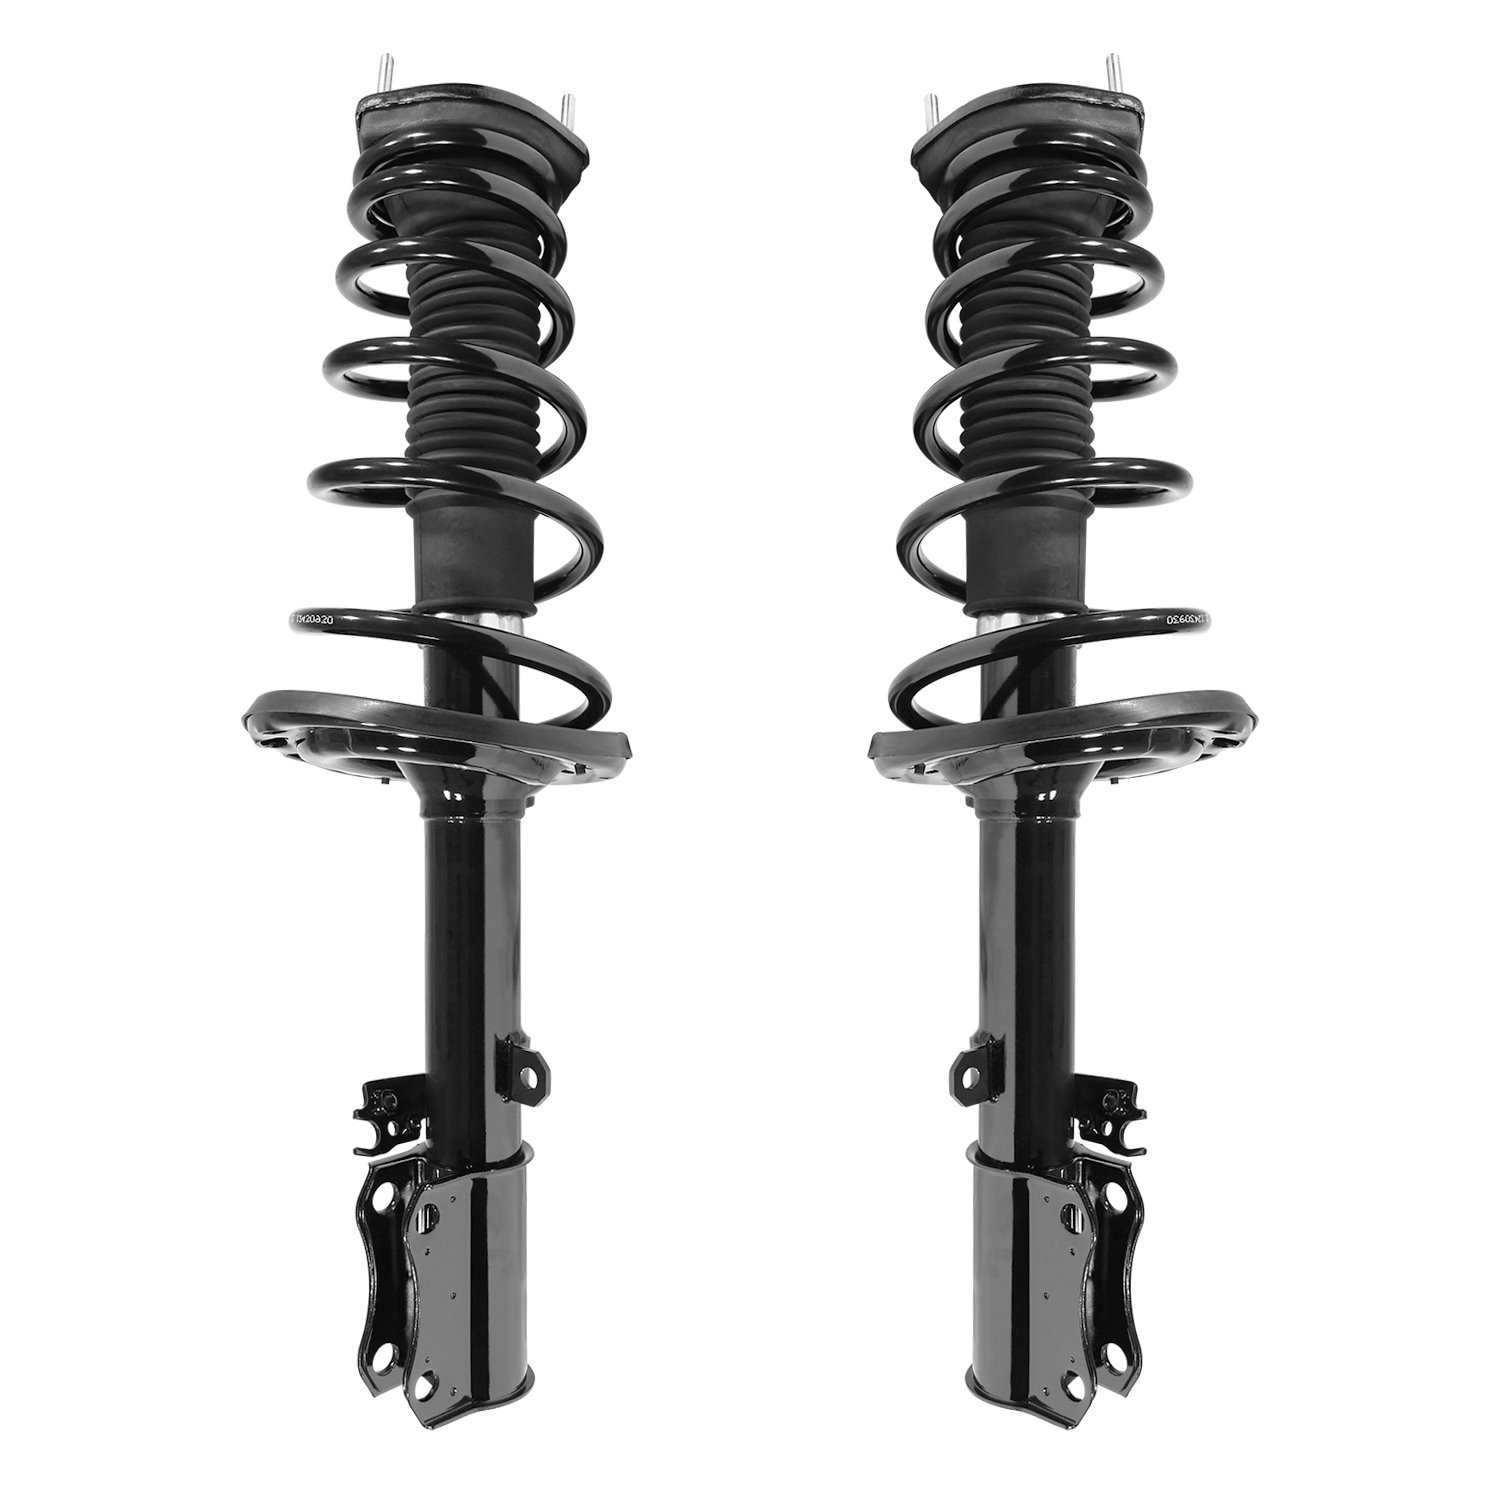 2-15351-15352-001 Suspension Strut & Coil Spring Assembly Set Fits Select Lexus ES330, Toyota Camry, Toyota Solara